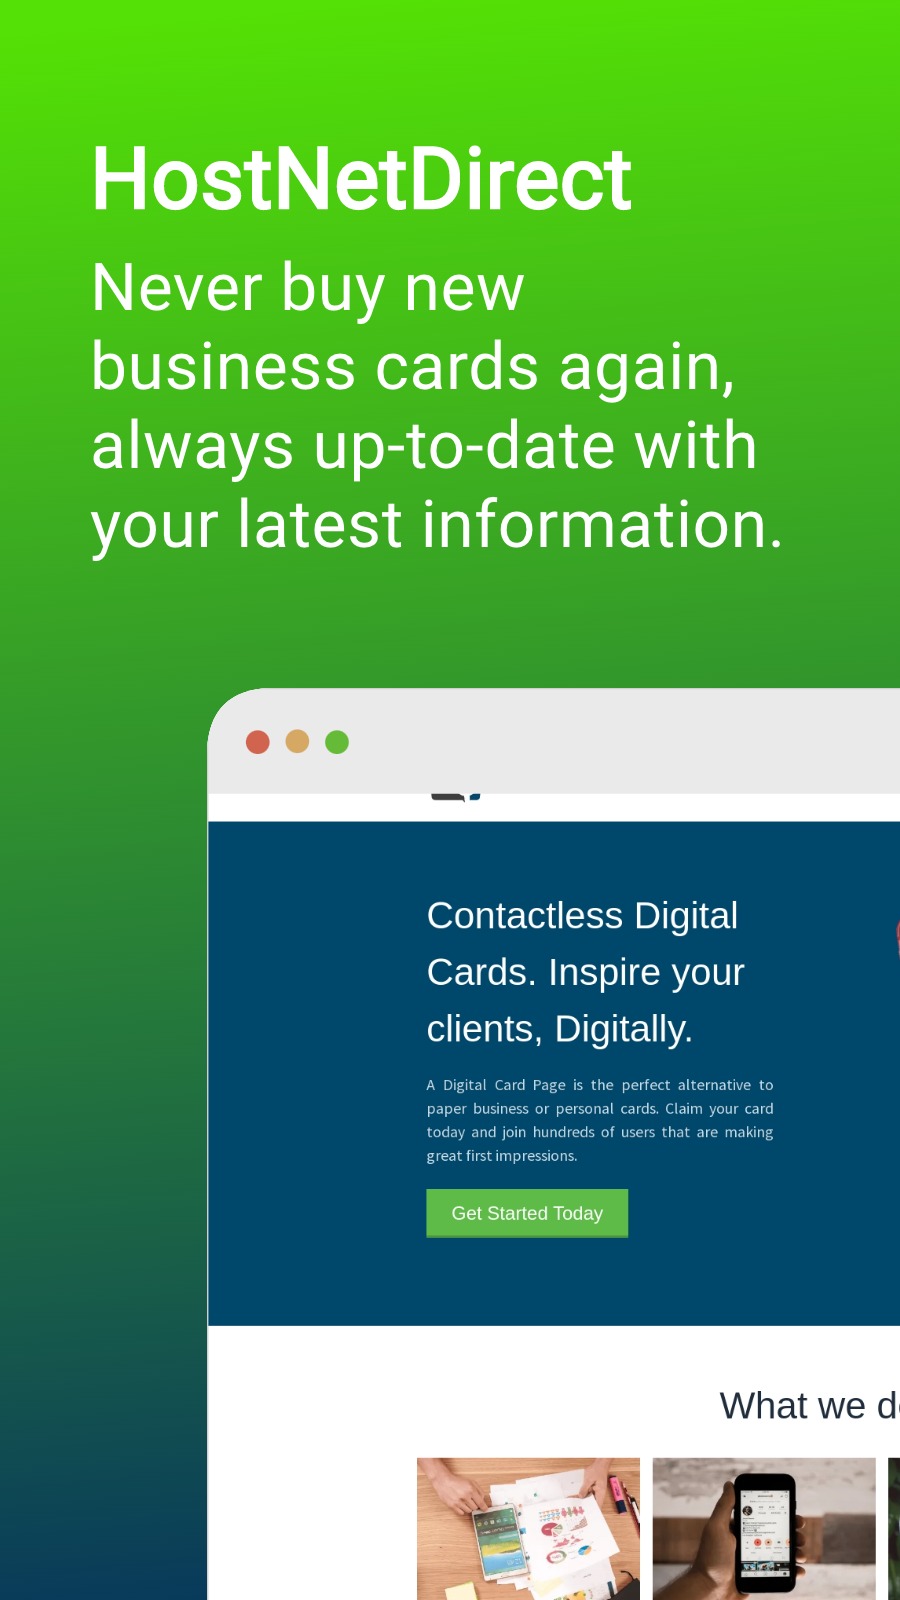 HostNetDirect - Never buy new business cards again, always up-to-date with your latest information.